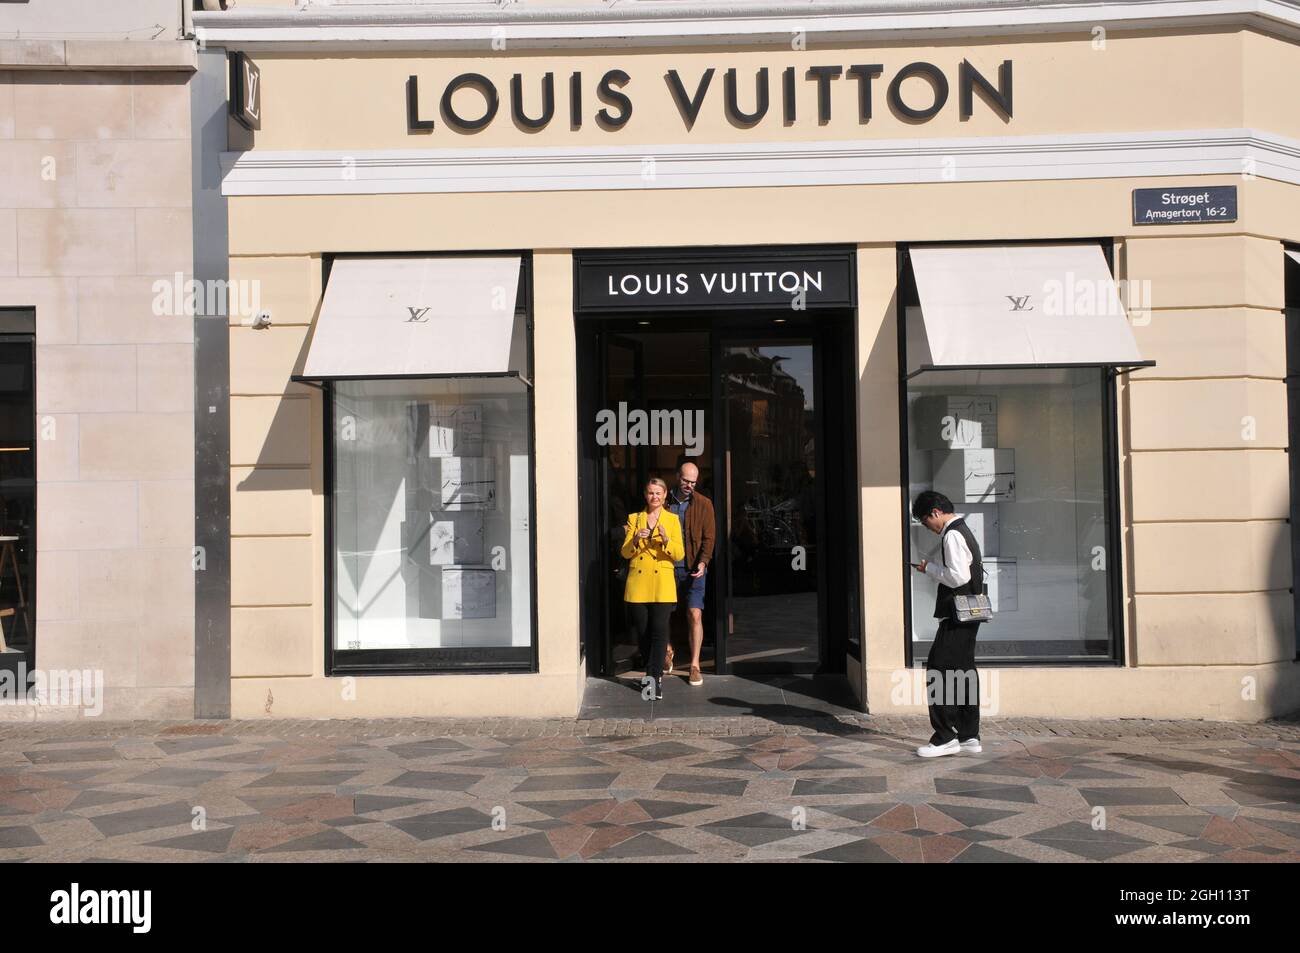 Denmark. 04 September 2021, Shoppers waiting at Louis Vuitton dueto social distancing in store due to covid-19 health issue. Stock Photo - Alamy